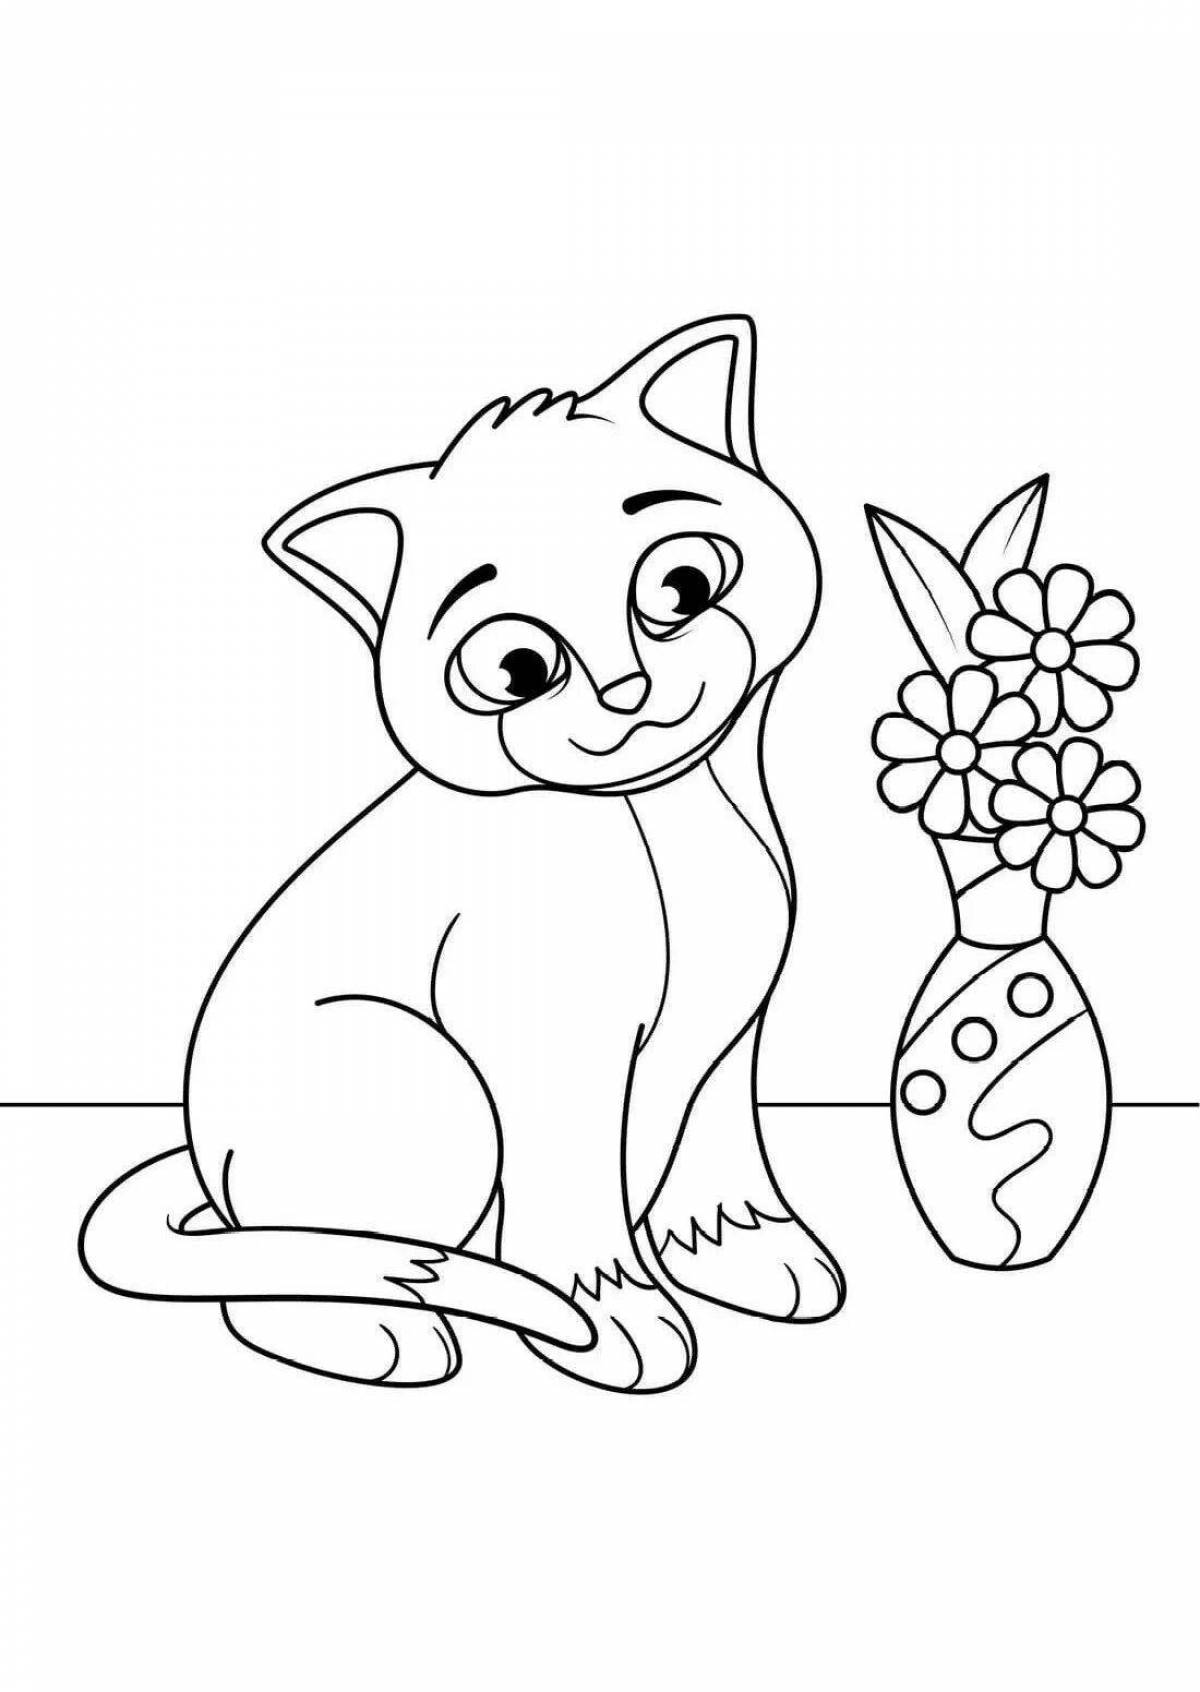 Naughty kitten coloring pages